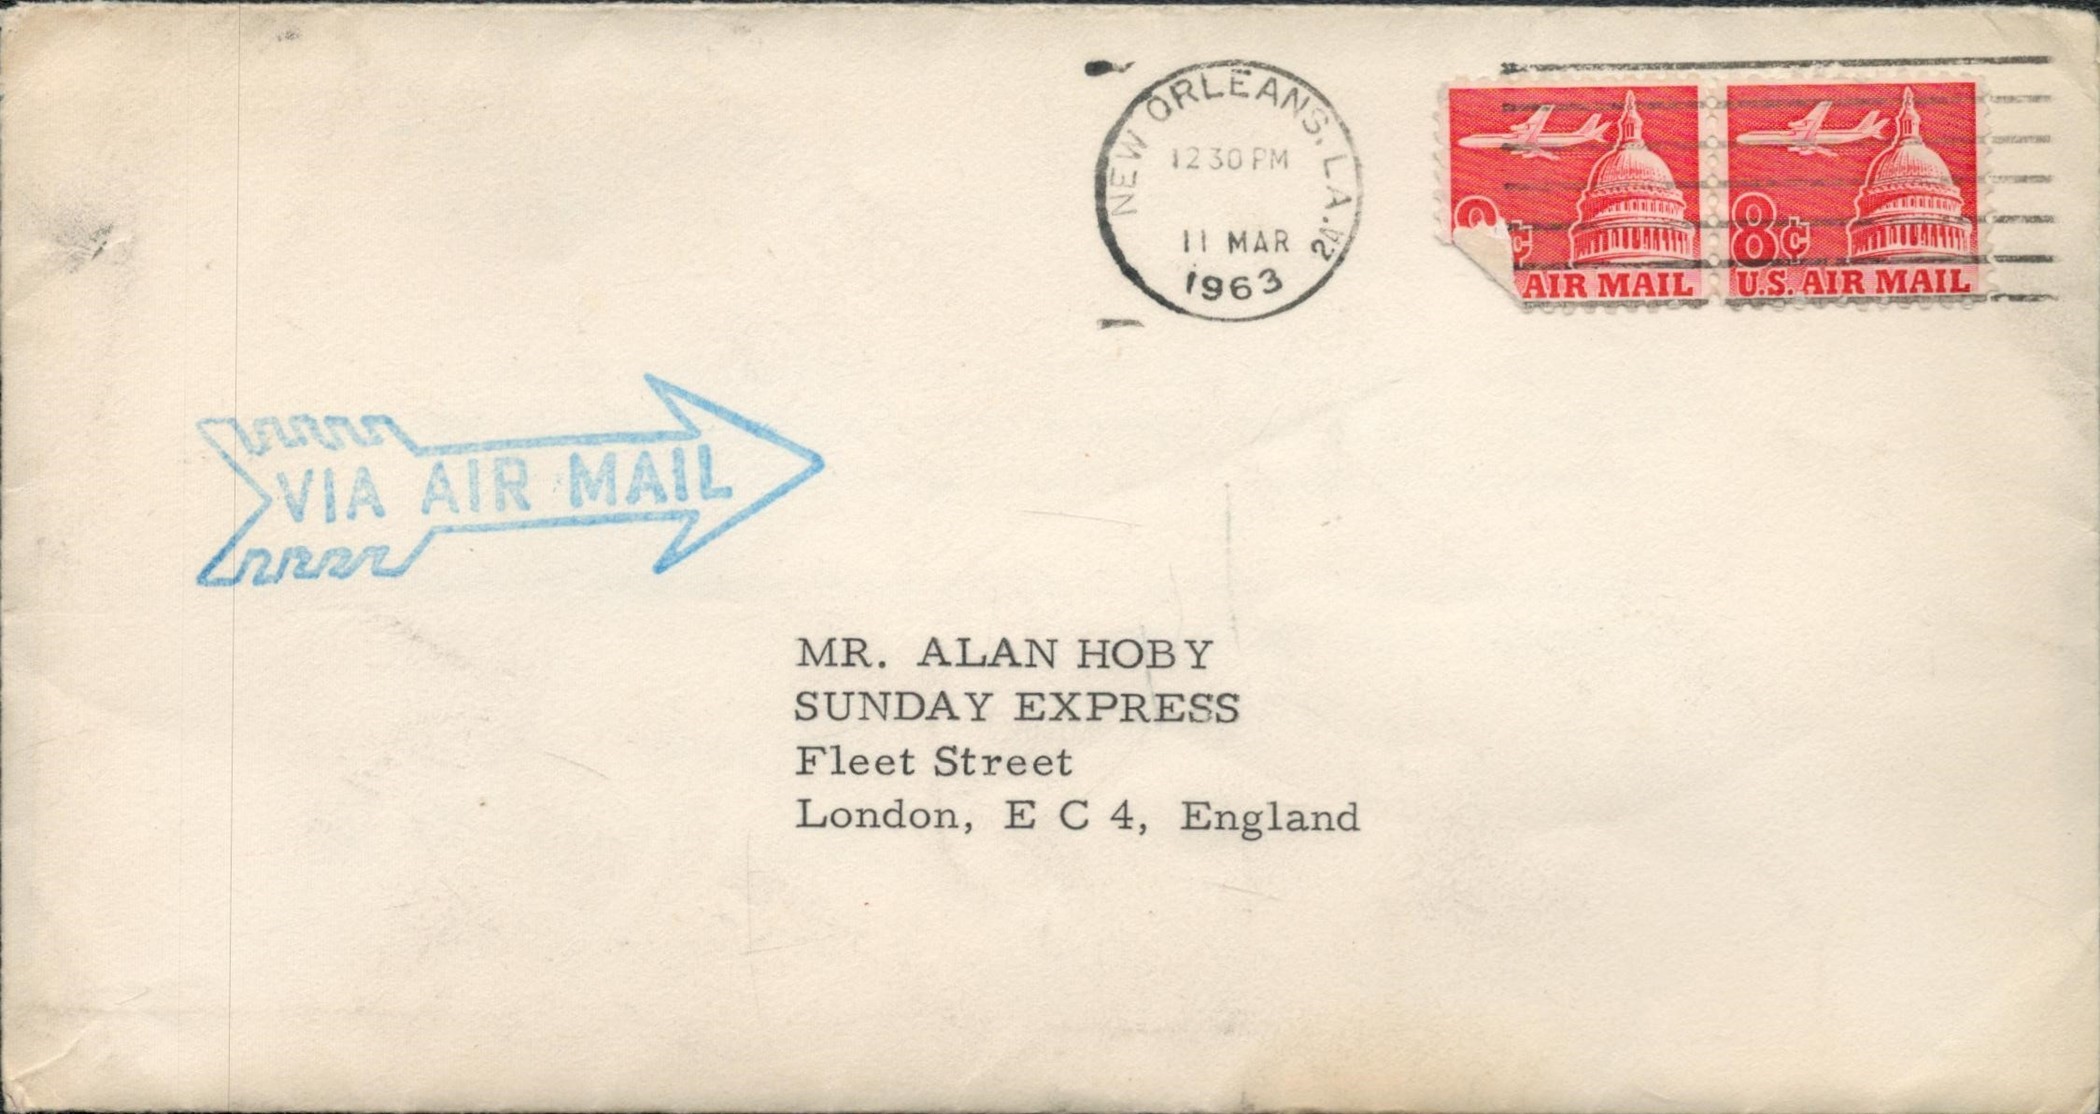 Ben Hogan TLS dated March 7, 1963, on headed note paper with original Air mail envelope